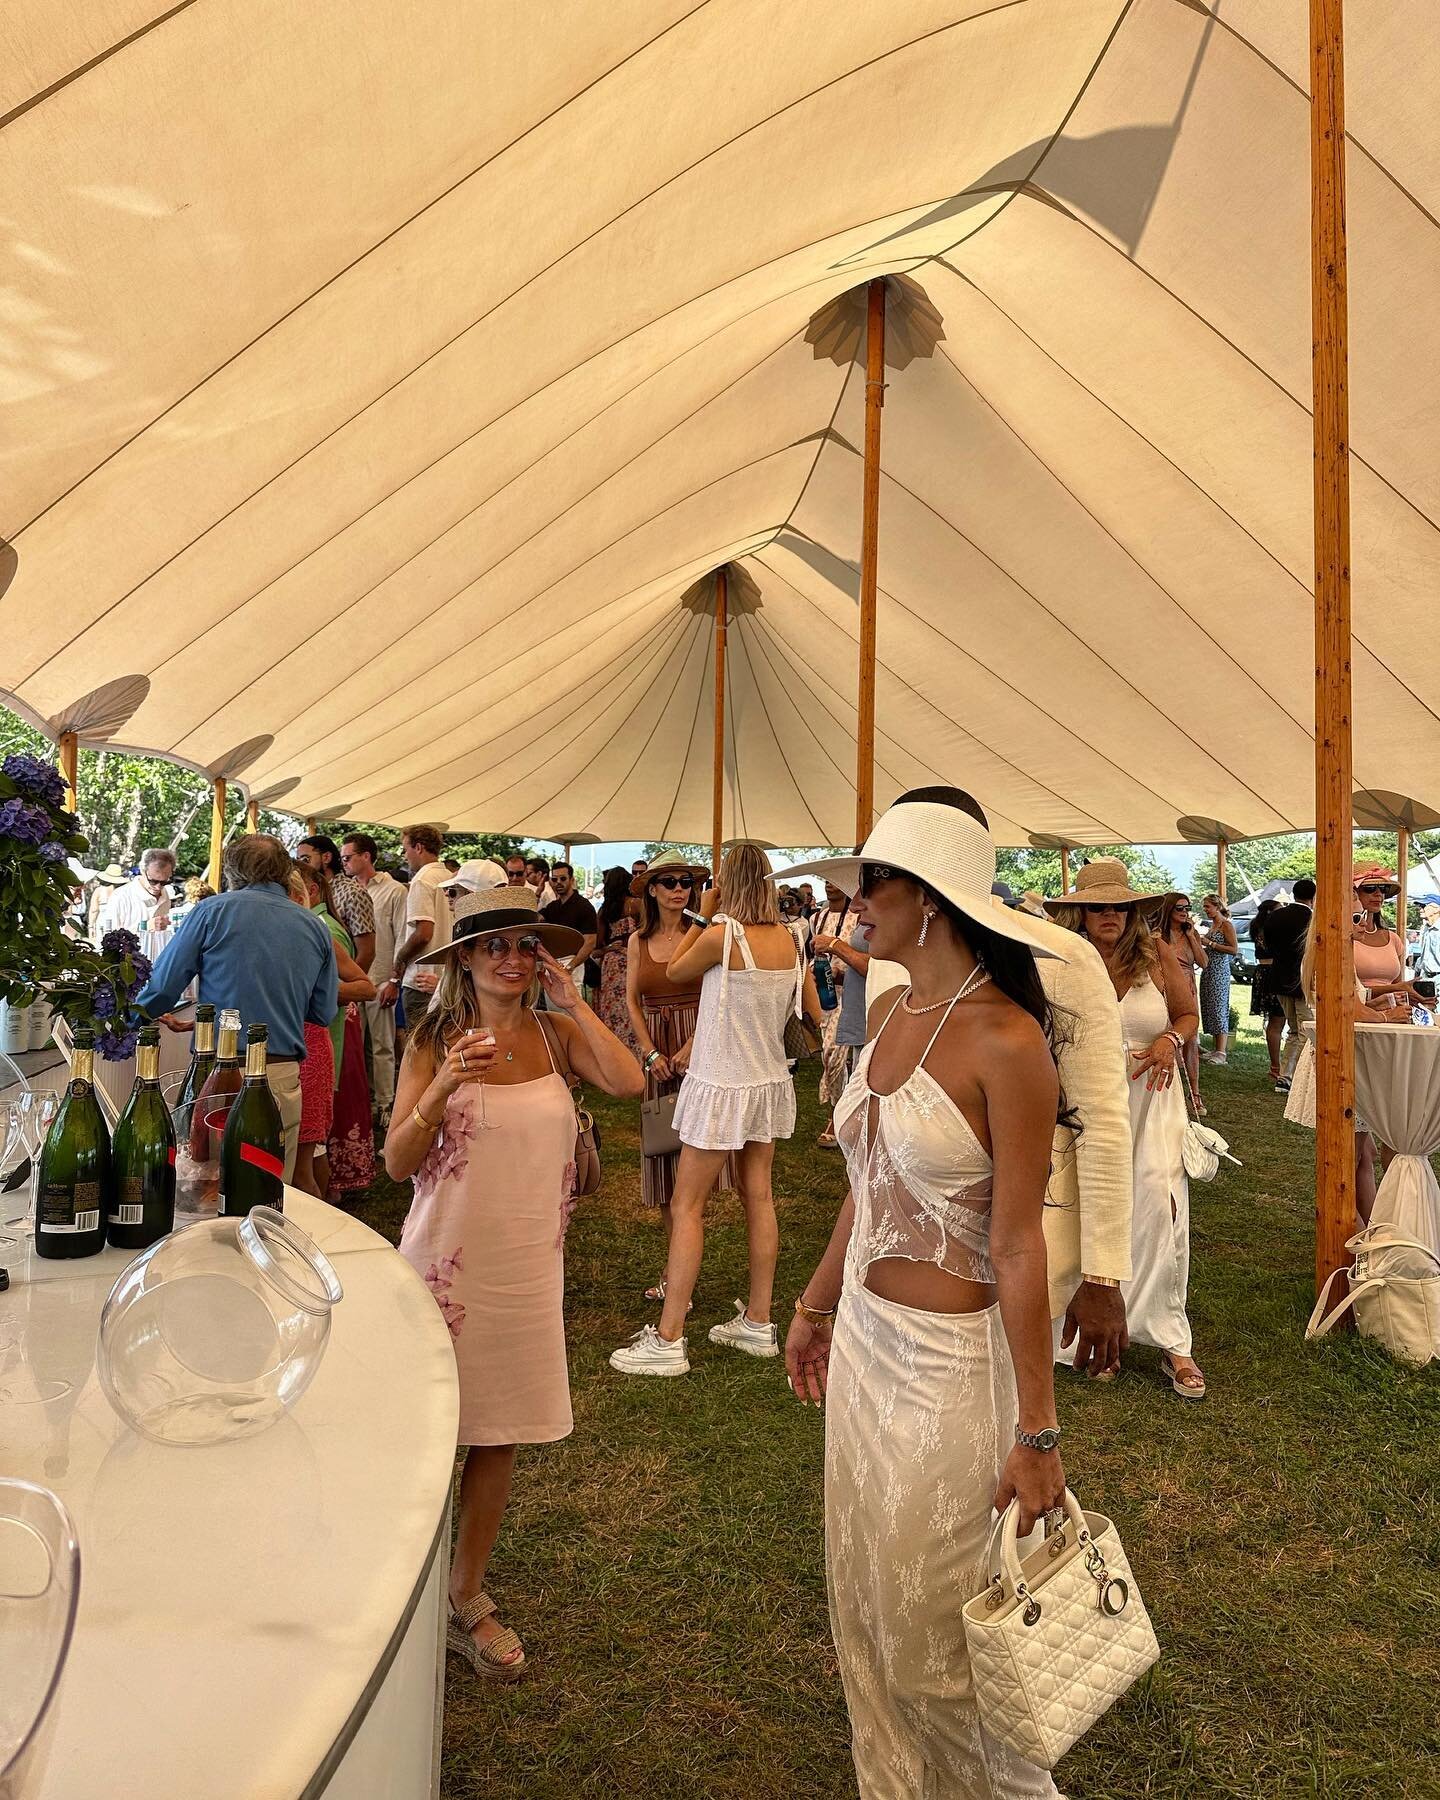 Everyone showed out for @polohamptons Polo match and cocktail party! 

Everyone was treated to a open bar and a thrilling game. 

#polo #cocktail #hamptons #polohamptons